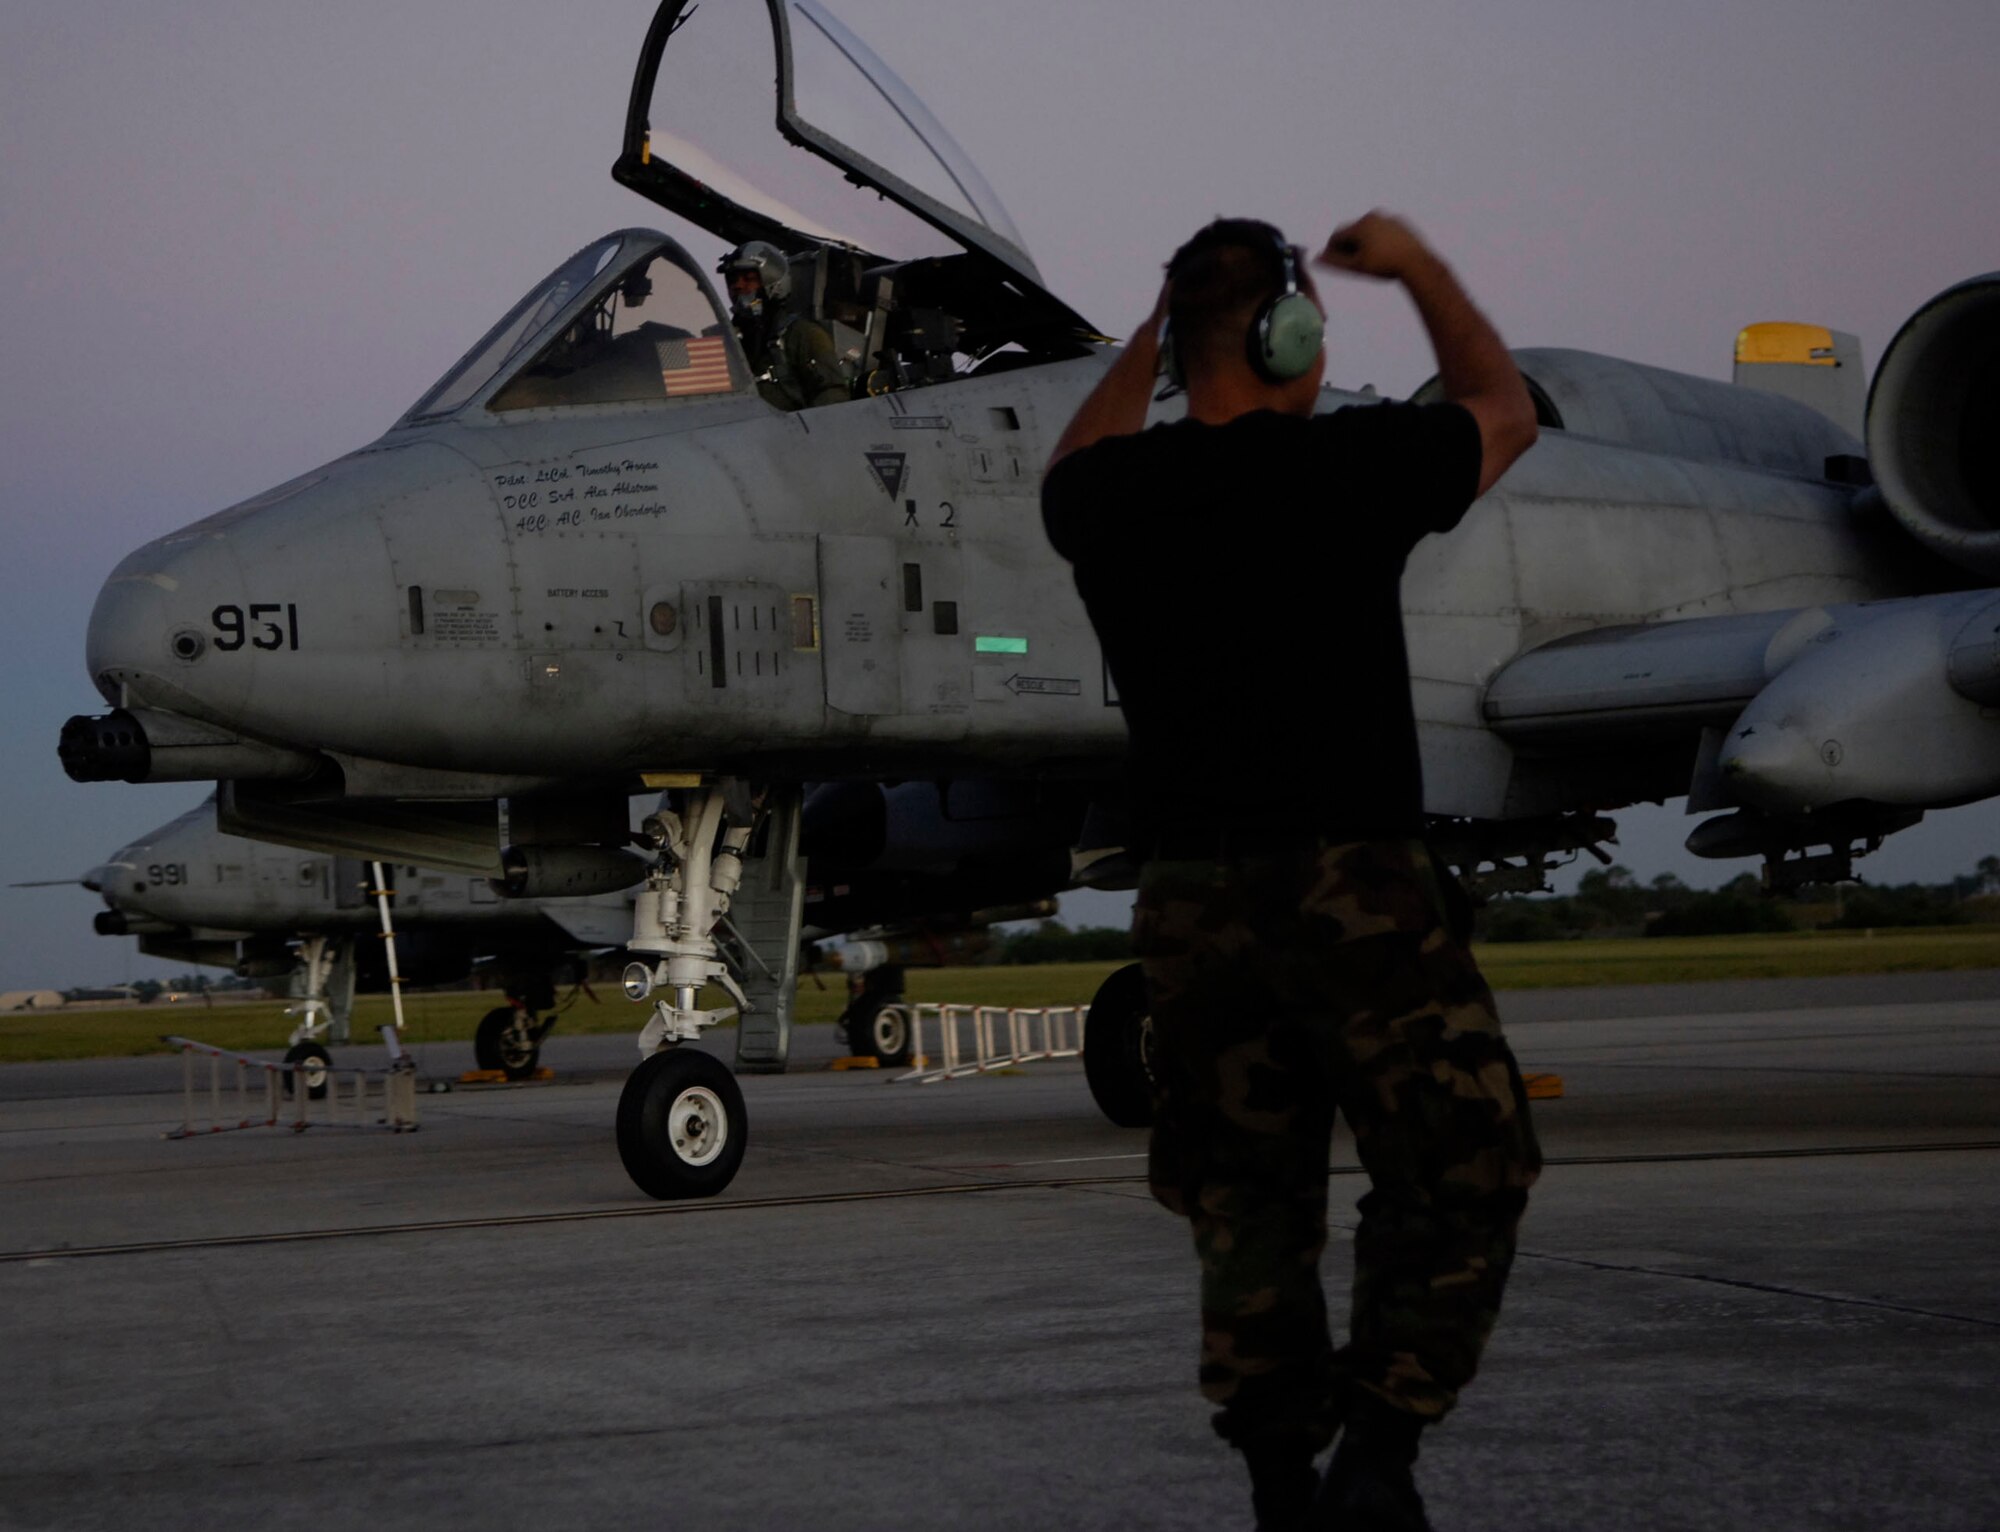 Senior Airman Alexander W. Ahlstrom, a crew chief from Spandahlem Air Base, Germany directs an A-10 towards the aircraft taxi lane before departure from MacDill AFB Fla. The A-10 unit is deployed to MacDill AFB to support exercise Atlantic Strike VI in Avon Park Fla. An F/A-18 Hornet taxies towards the runway at MacDill AFB Fla. in support of exercise Atlantic Strike VI, a U.S. Central Command Air Forces-sponsored exercise focusing on urban close air support operations. A-10 Thunderbolt II close air support aircraft are prepared for the next sortie as the Navy component departs for the Avon Park military ranges. (U.S. Air Force Photo By Airman 1st Class Stephenie Wade)